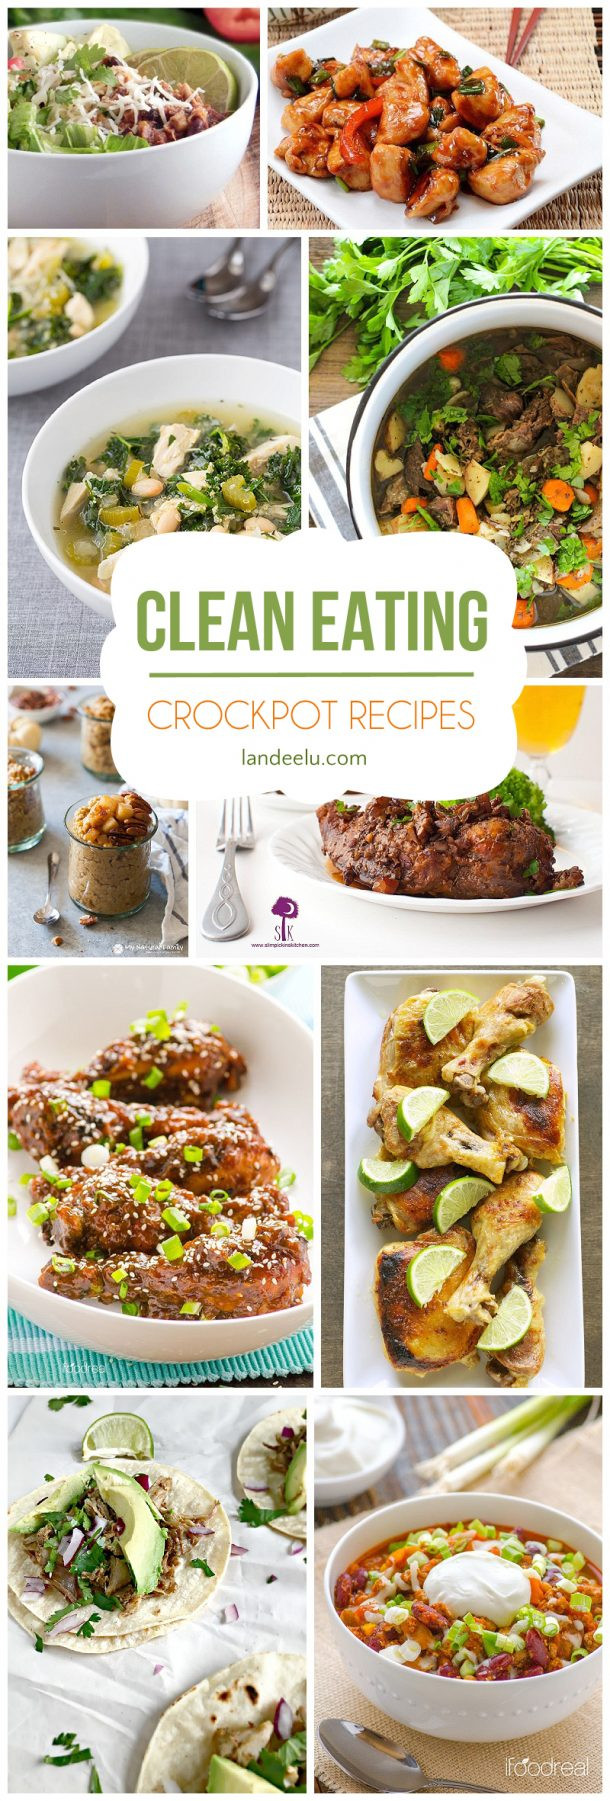 Clean Eating Crock Pot Meals
 Delicious Clean Eating Crockpot Recipes Page 2 of 2